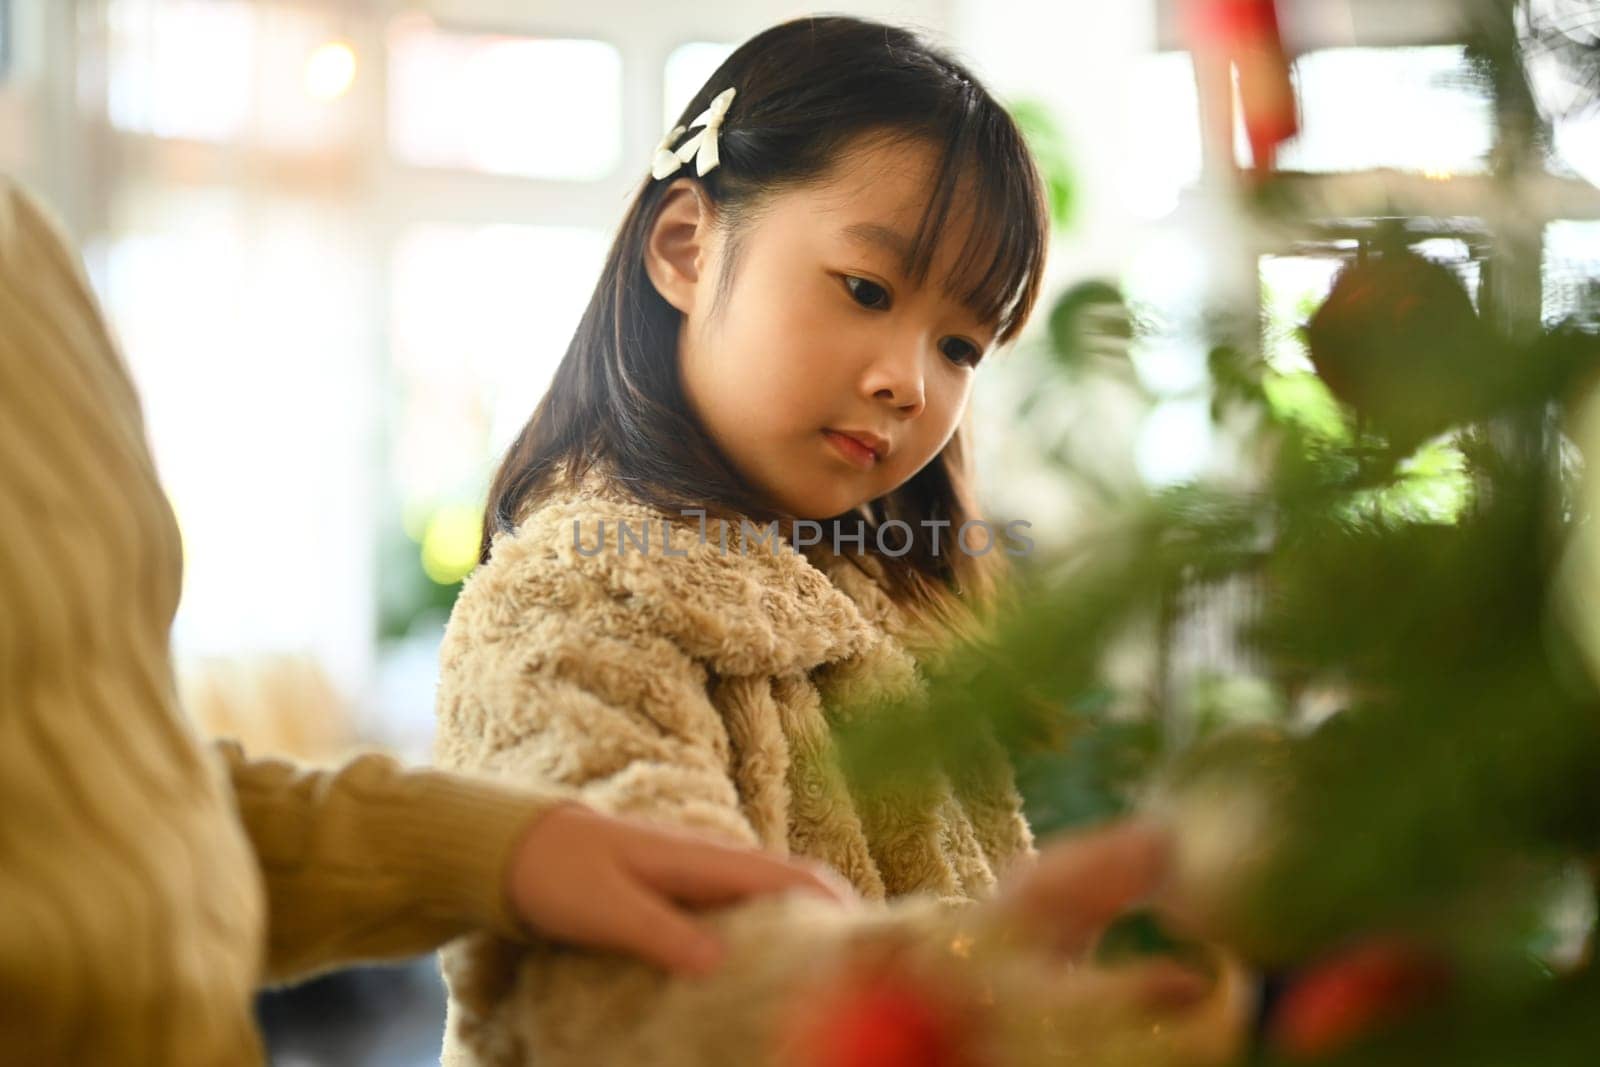 Image of adorable girl decorating Christmas tree preparing for Christmas holidays and happy new year.